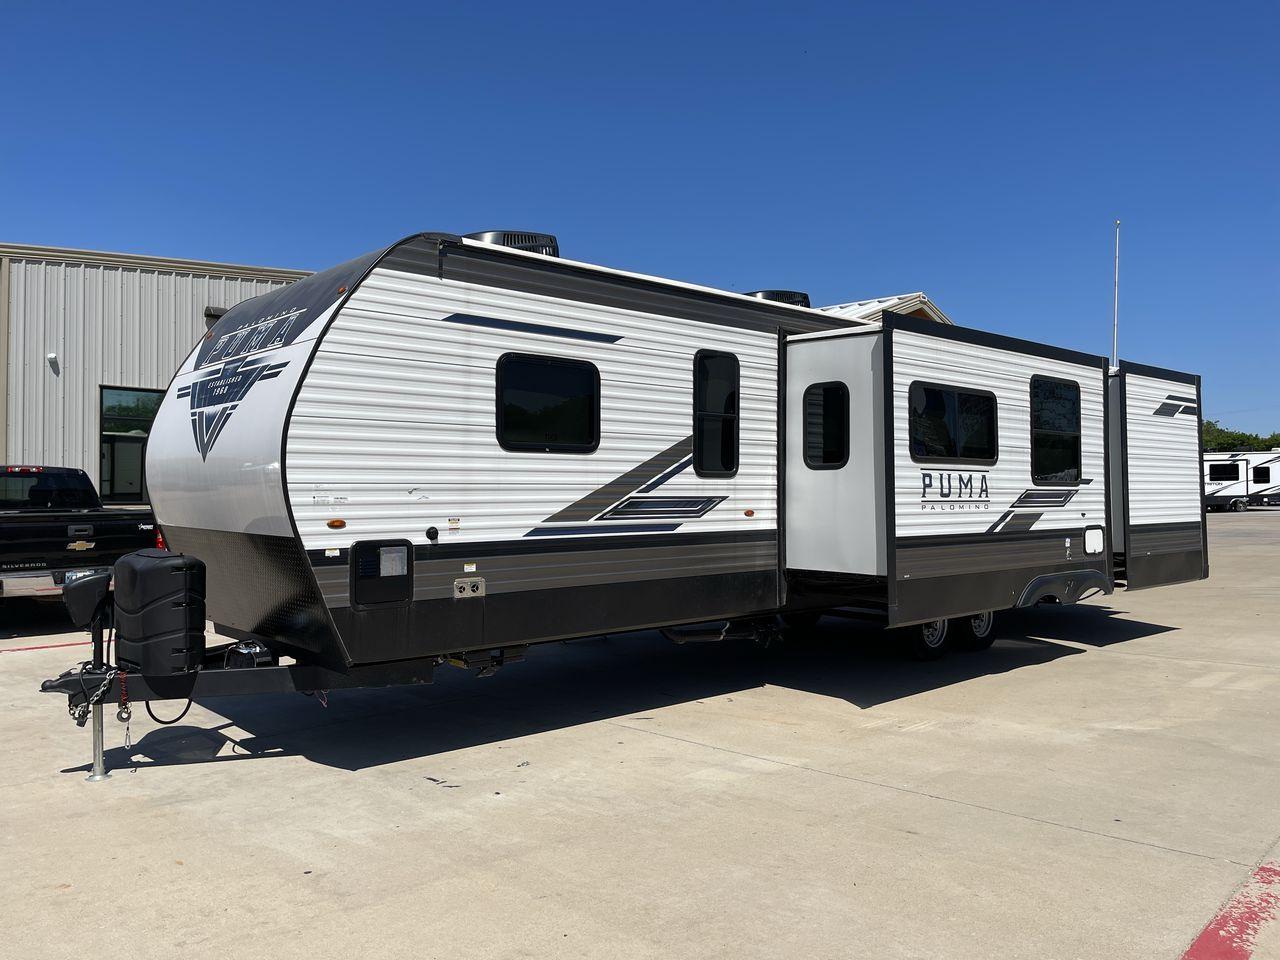 2023 FOREST RIVER PUMA 32BH2B (4X4TPUH21PP) , Length: 38.5 ft. | Dry Weight: 9,023 lbs. | Gross Weight: 11,230 lbs | Slides: 3 transmission, located at 4319 N Main St, Cleburne, TX, 76033, (817) 678-5133, 32.385960, -97.391212 - With its ample space and adaptability, the 2023 Palomino Puma 32BH2B travel trailer is perfect for hosting extended families and gatherings. This model provides generous living space while maintaining excellent maneuverability on the road. It measures 38.5 feet in length and has a dry weight of 9,02 - Photo #25